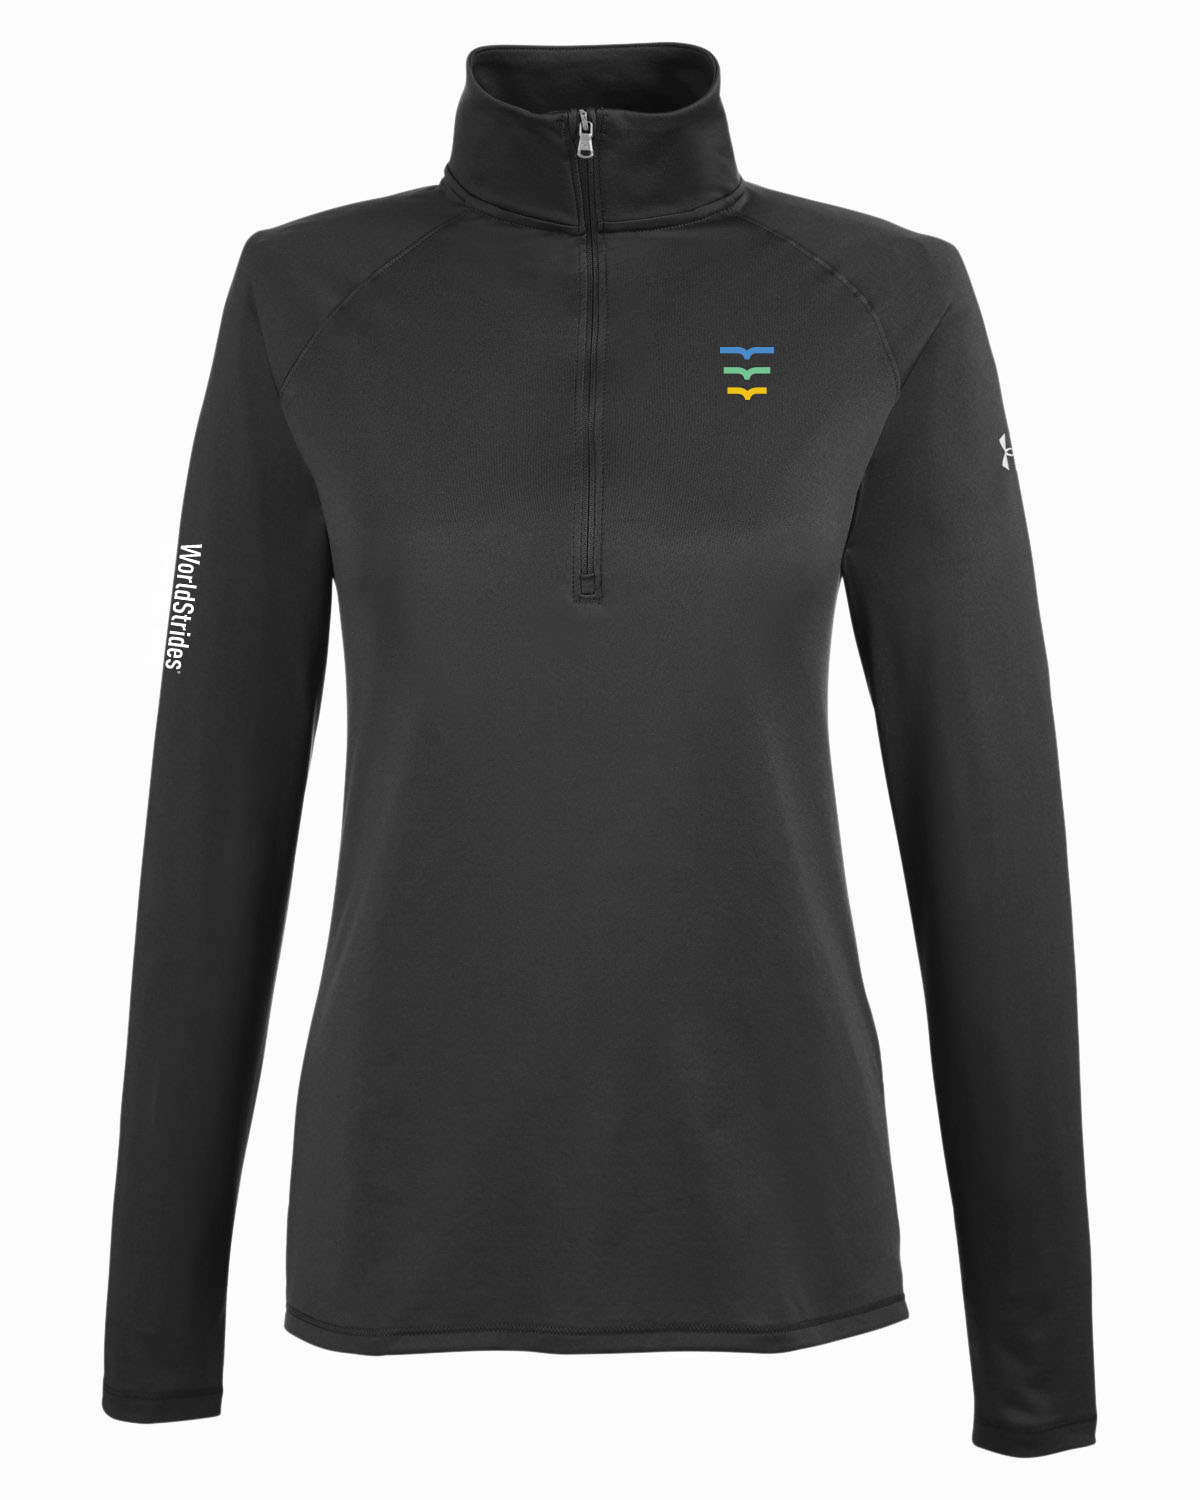 Clearance - Fitted-Cut Quarter-Zip Pullover